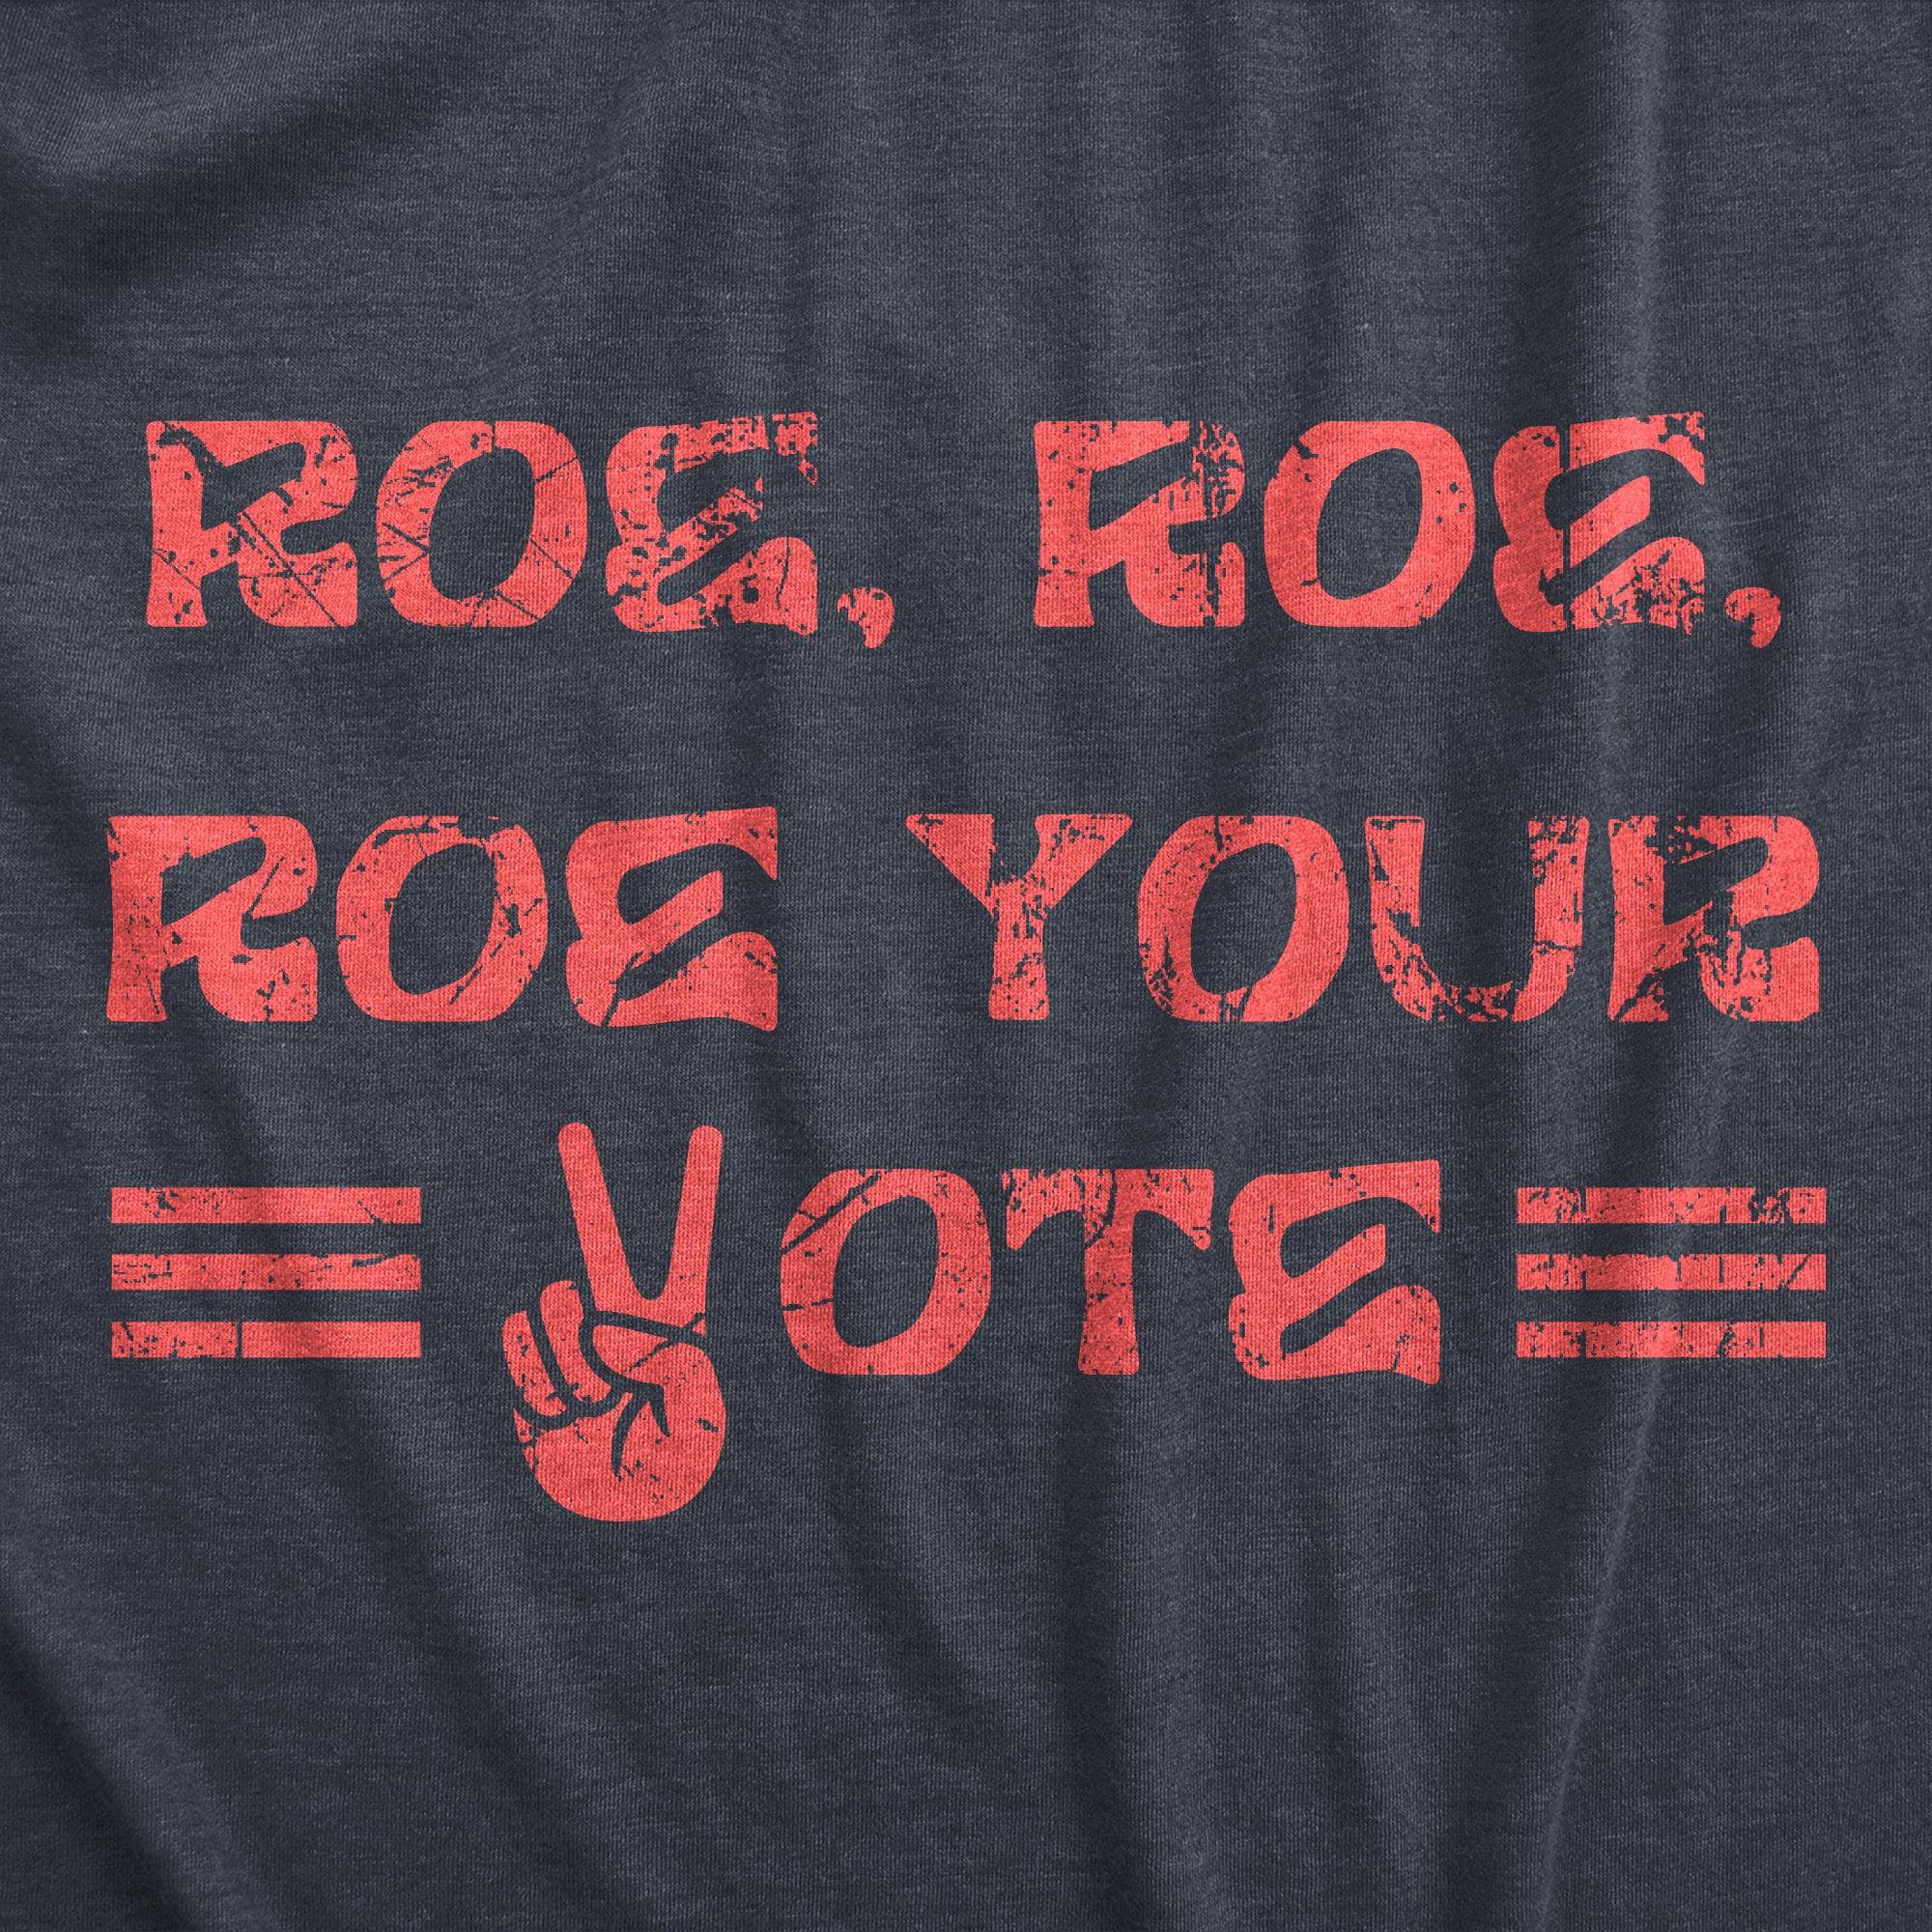 Roe Roe Roe Your Vote Women's Tshirt  -  Crazy Dog T-Shirts